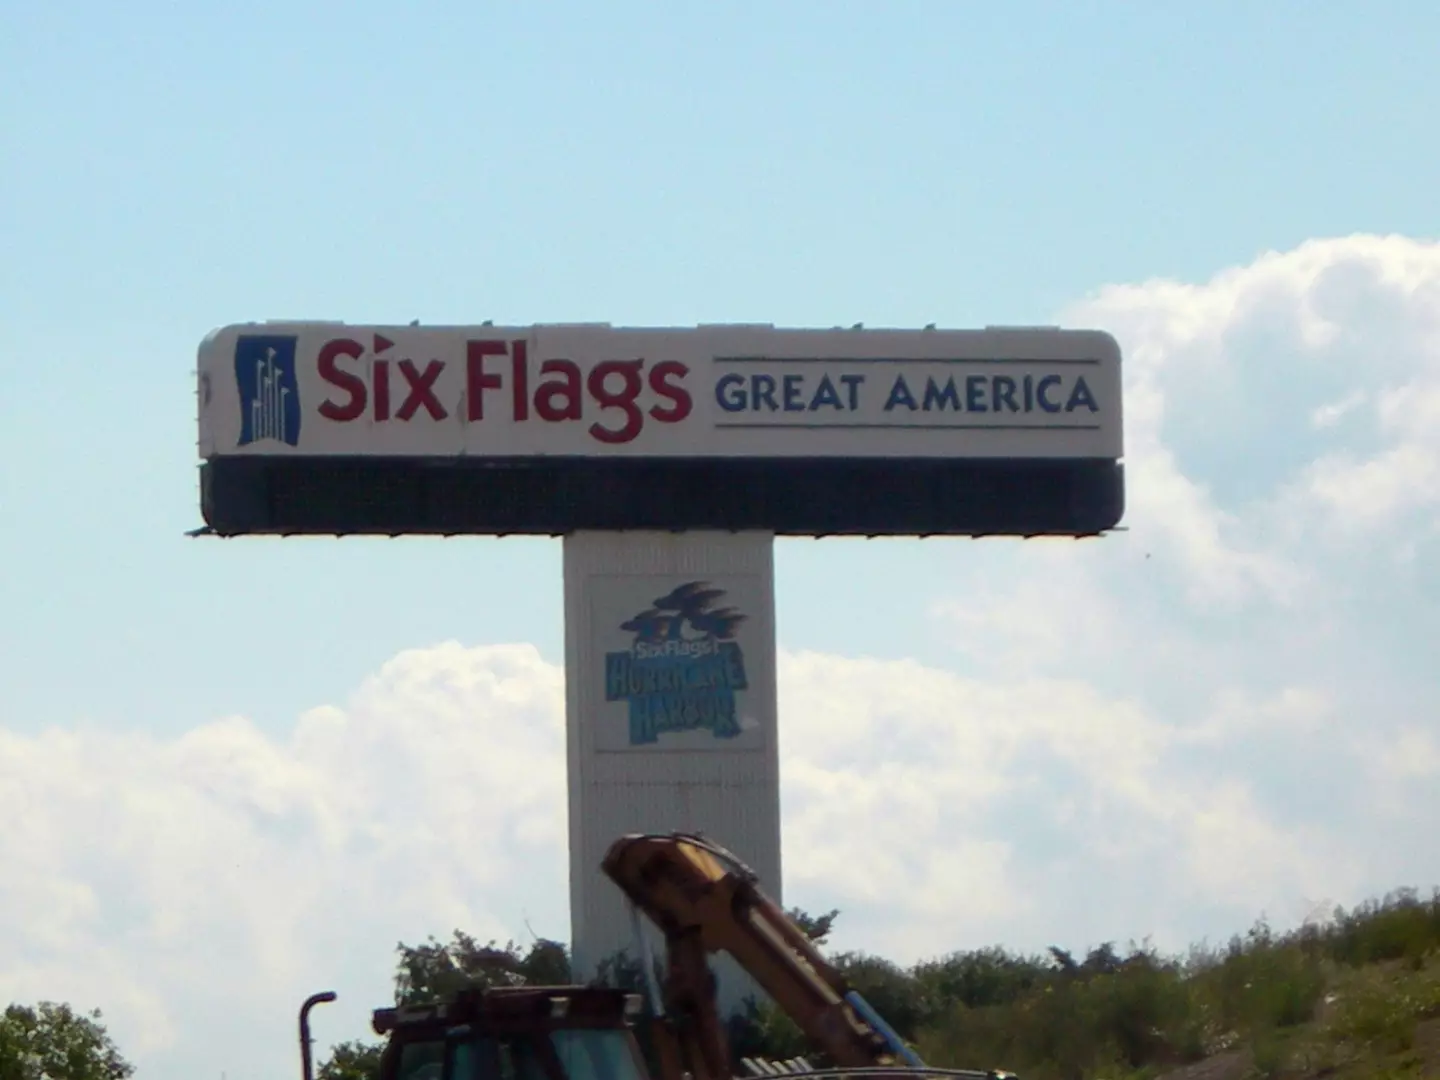 Three people were injured in the shooting at the Six Flags Great America amusement park.